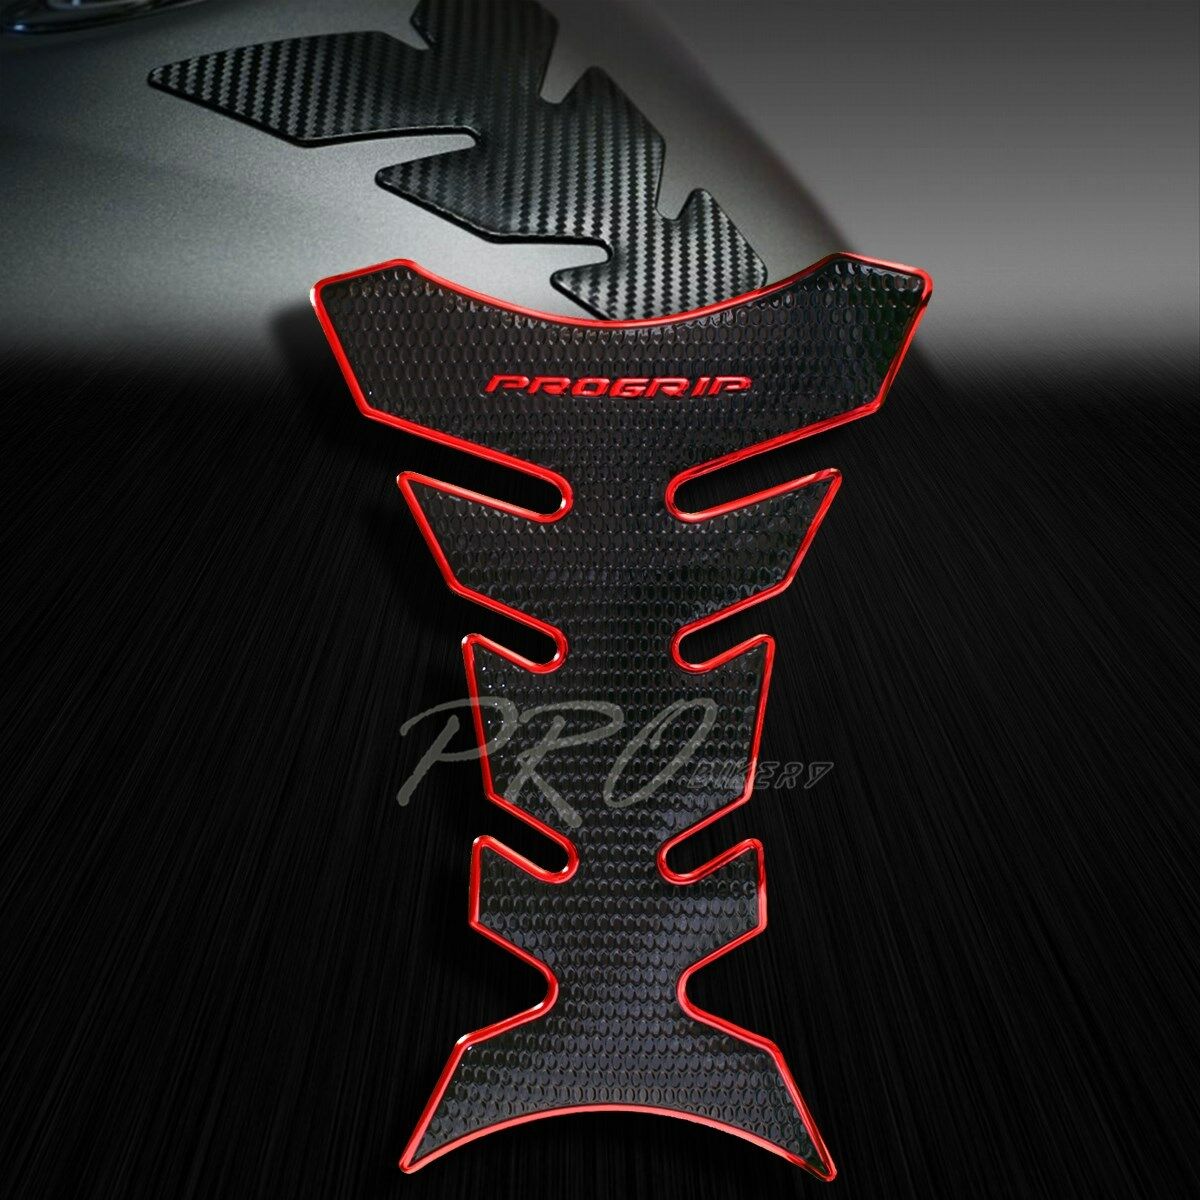 3d Pro Fuel/oil/gas Tank Pad Protector Grip Decal Perforated Black+chromed Red